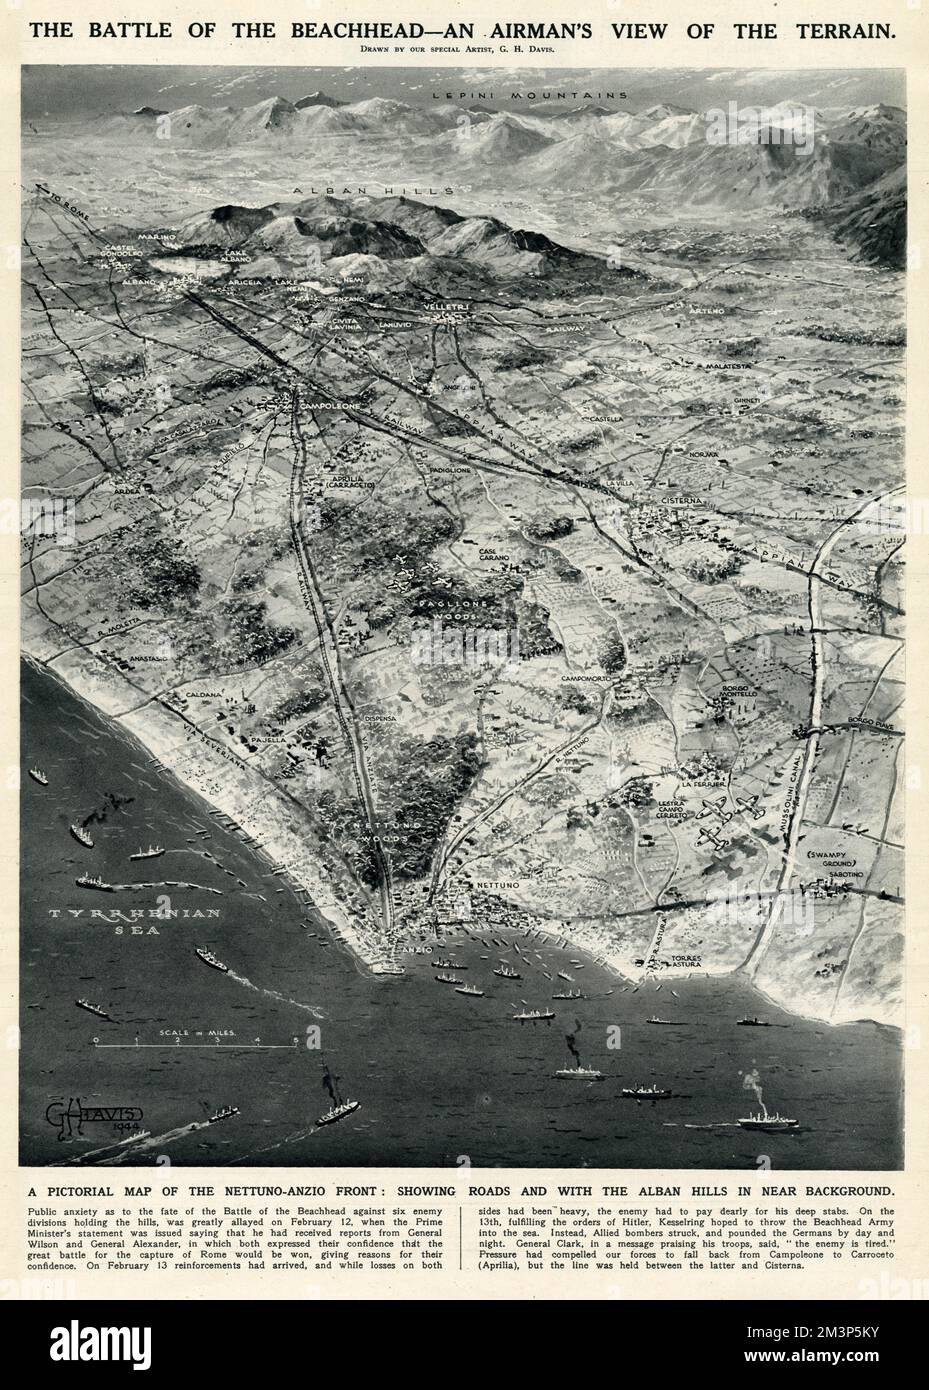 The battle of the beachhead -- an airman's view of the terrain.  A pictorial map of the Nettuno-Anzio Front, showing roads, with the Alban Hills in the background.  This was the scene of Operation Shingle, the Allied amphibious landing in the push towards Rome. Stock Photo